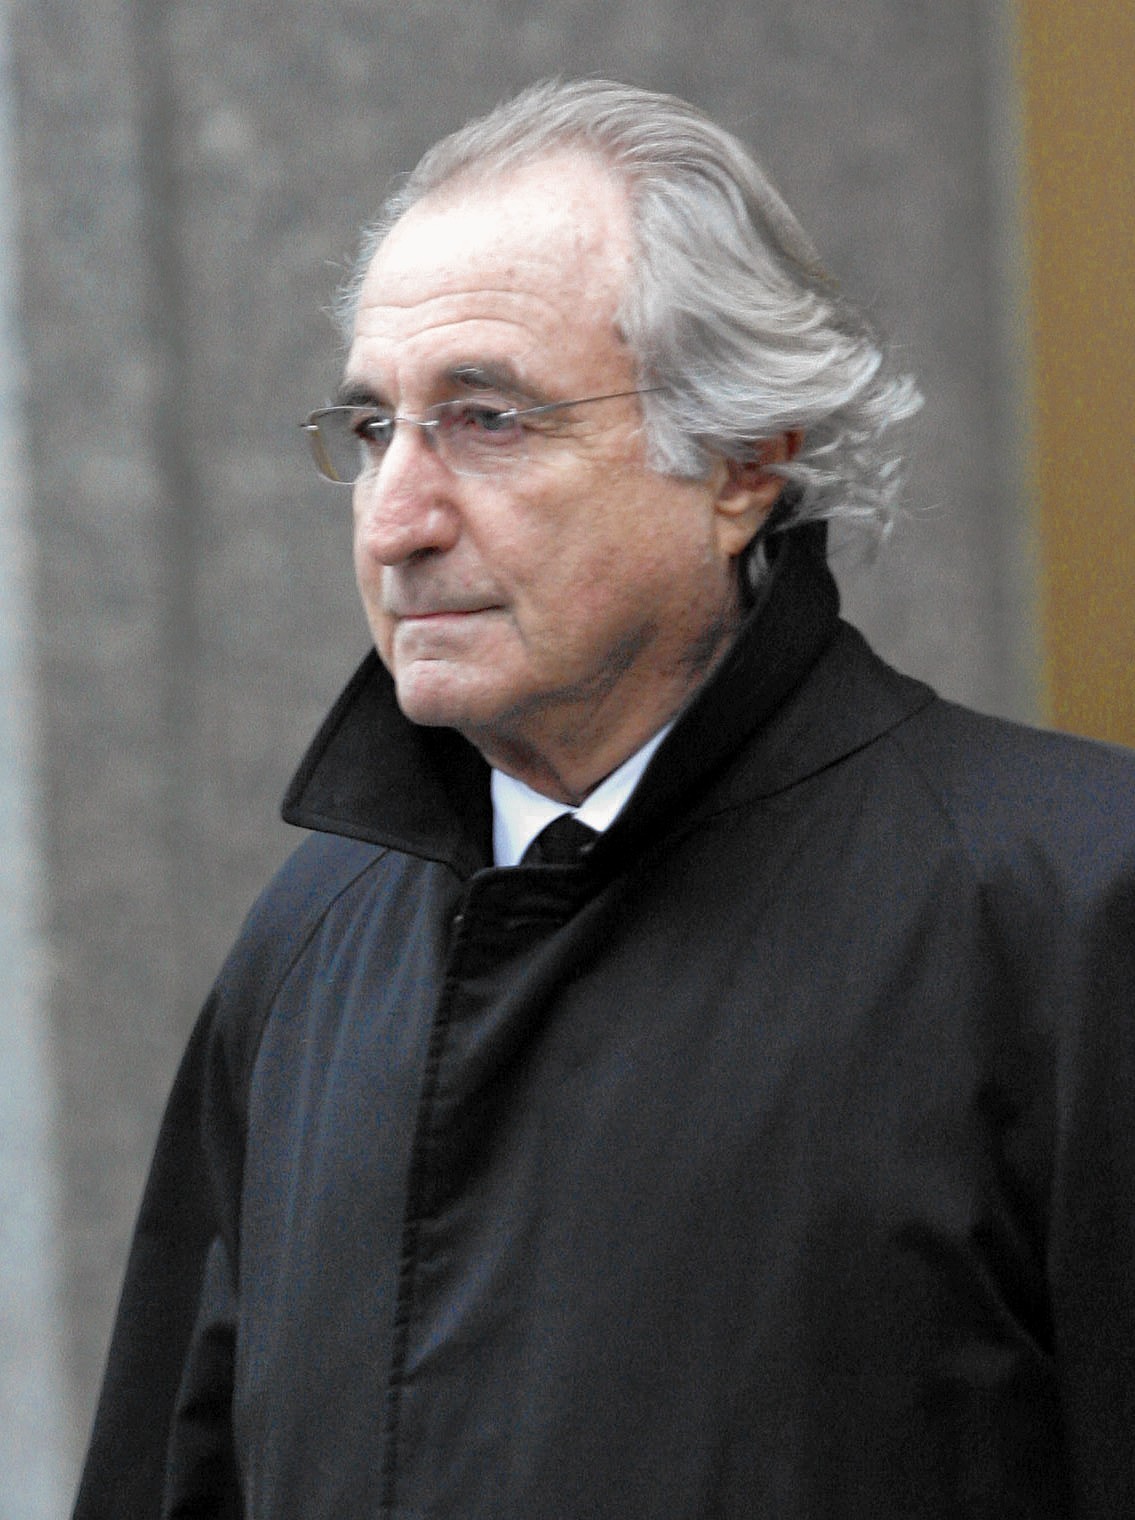 Bernie Madoff victims still hurting, despite the billions that have been recovered ...